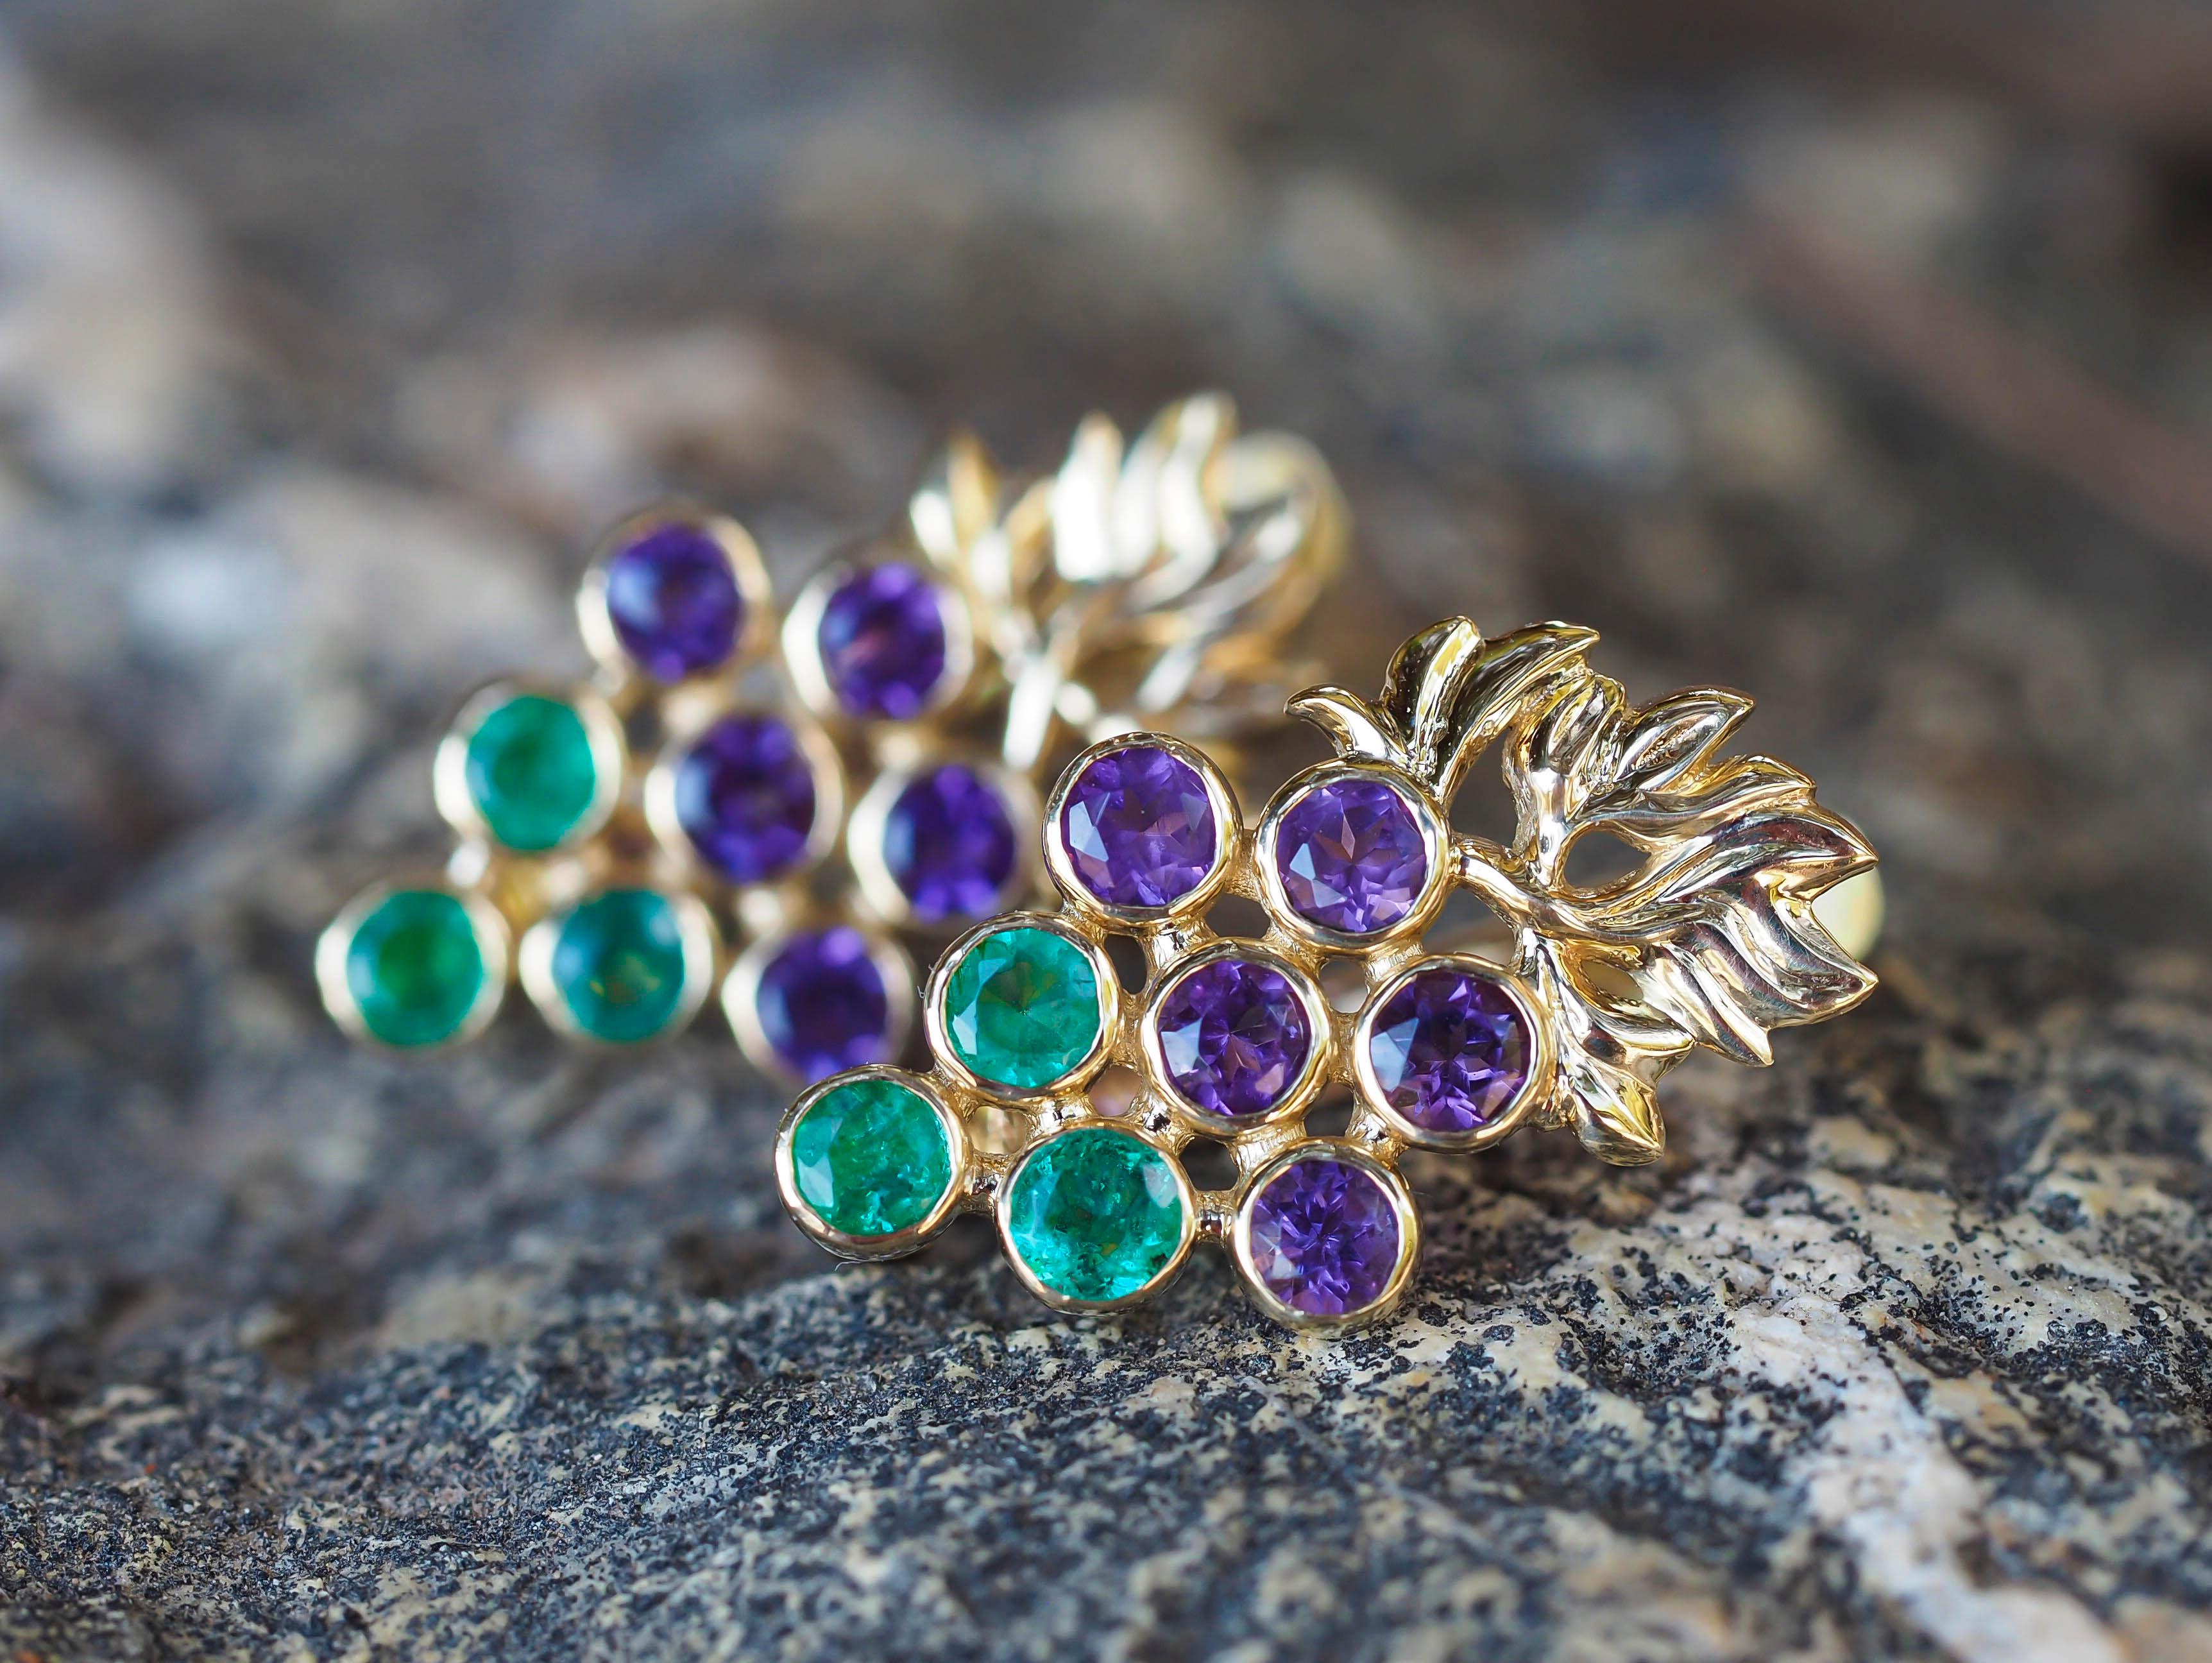 14k Gold Grape Earrings with Emeralds and Amethysts For Sale 4